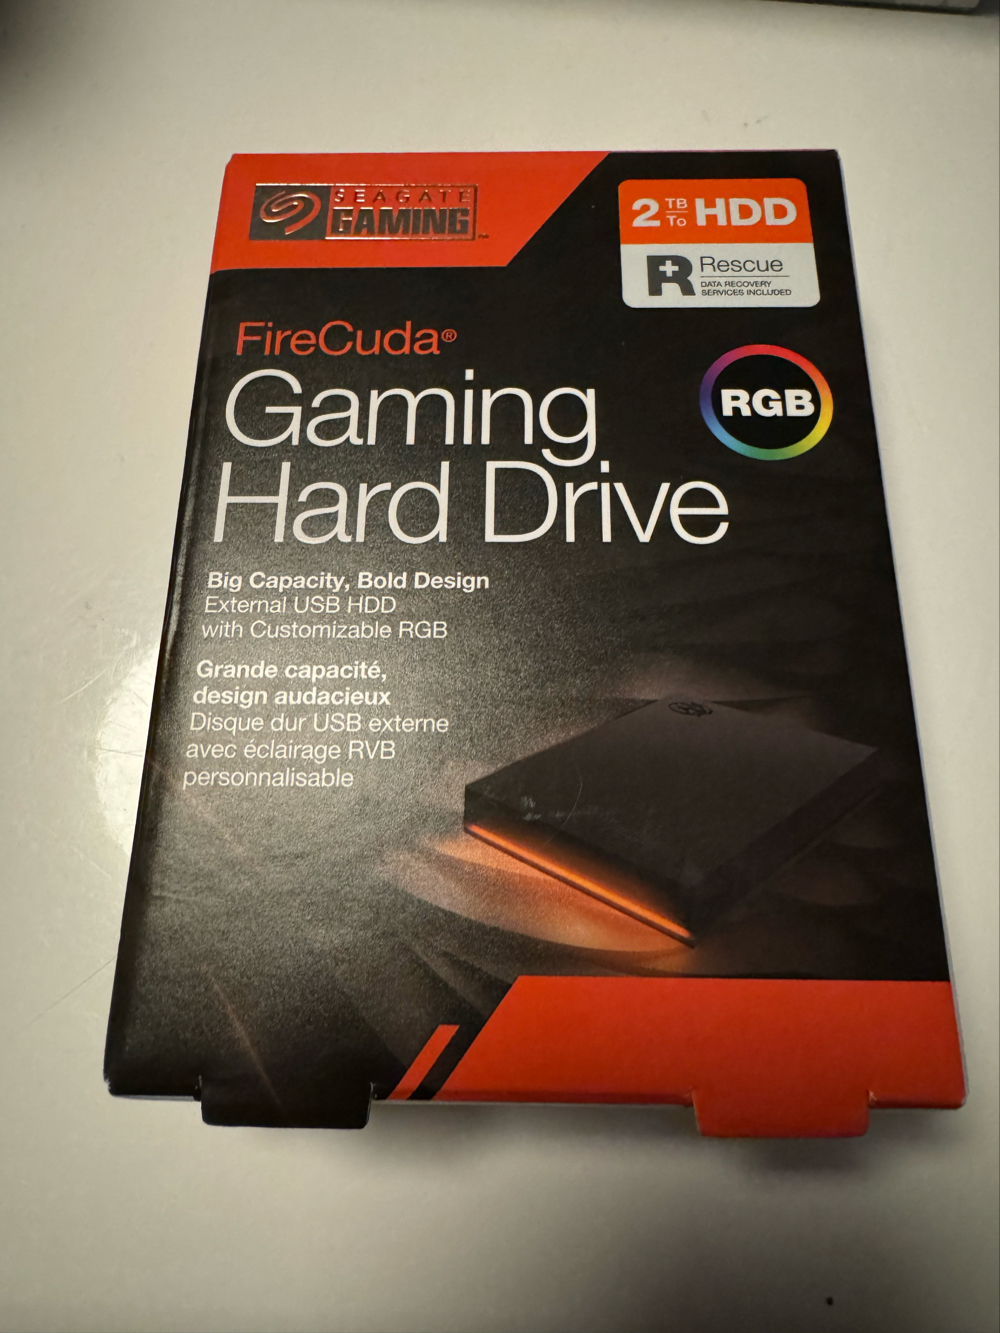 Seagate FireCuda Gaming Hard Drive 2TB - Externe HDD mit RGB-Beleuchtung